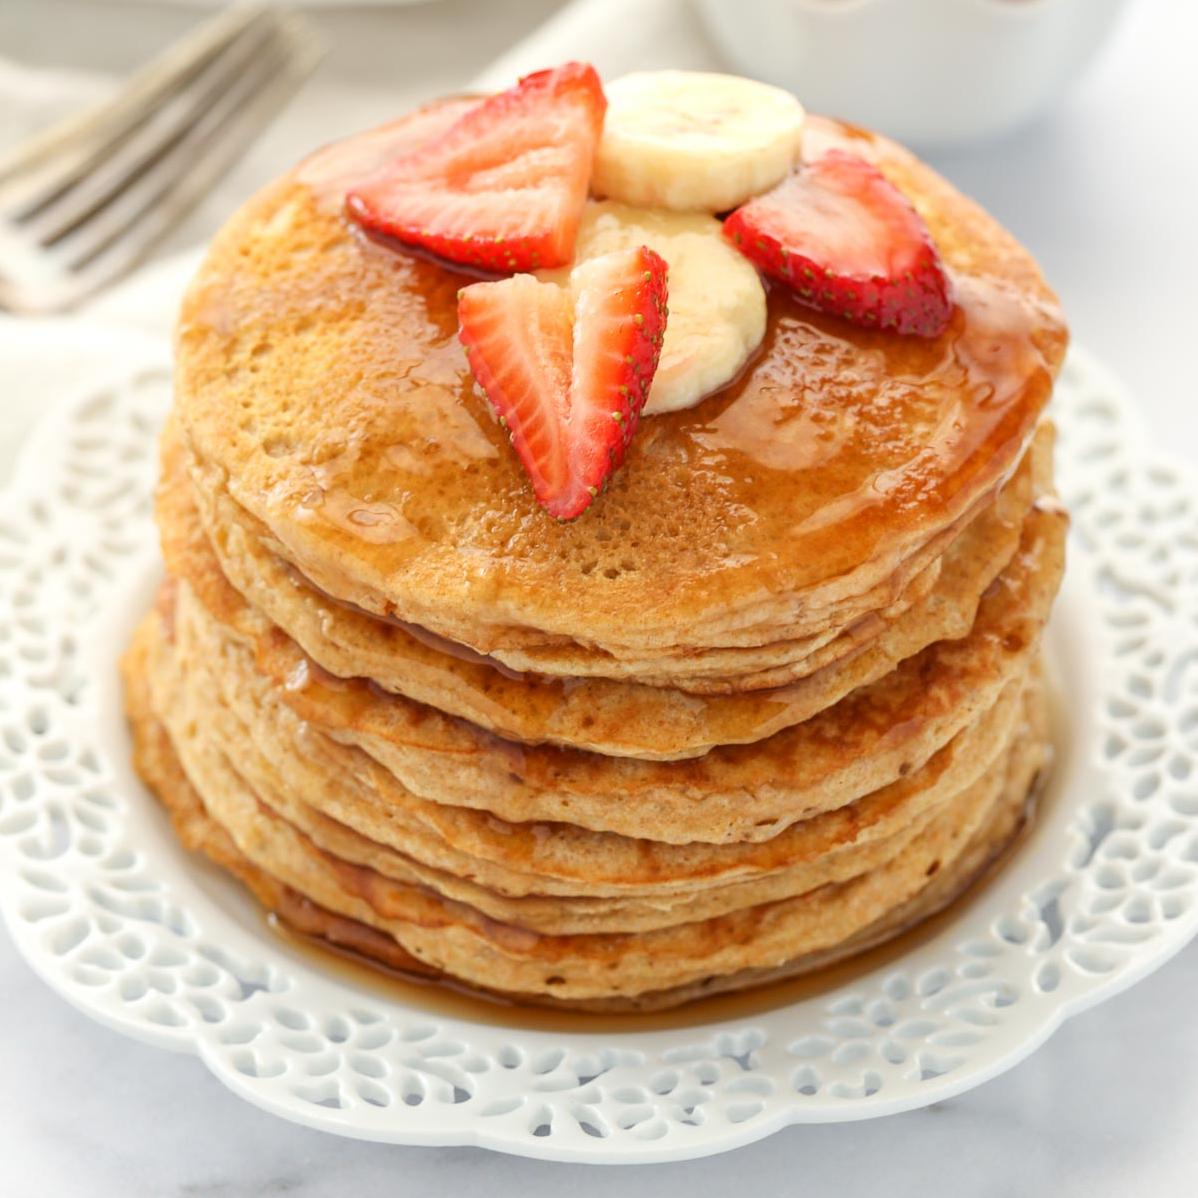  Top these whole wheat pancakes with fruit for an added burst of sweetness.